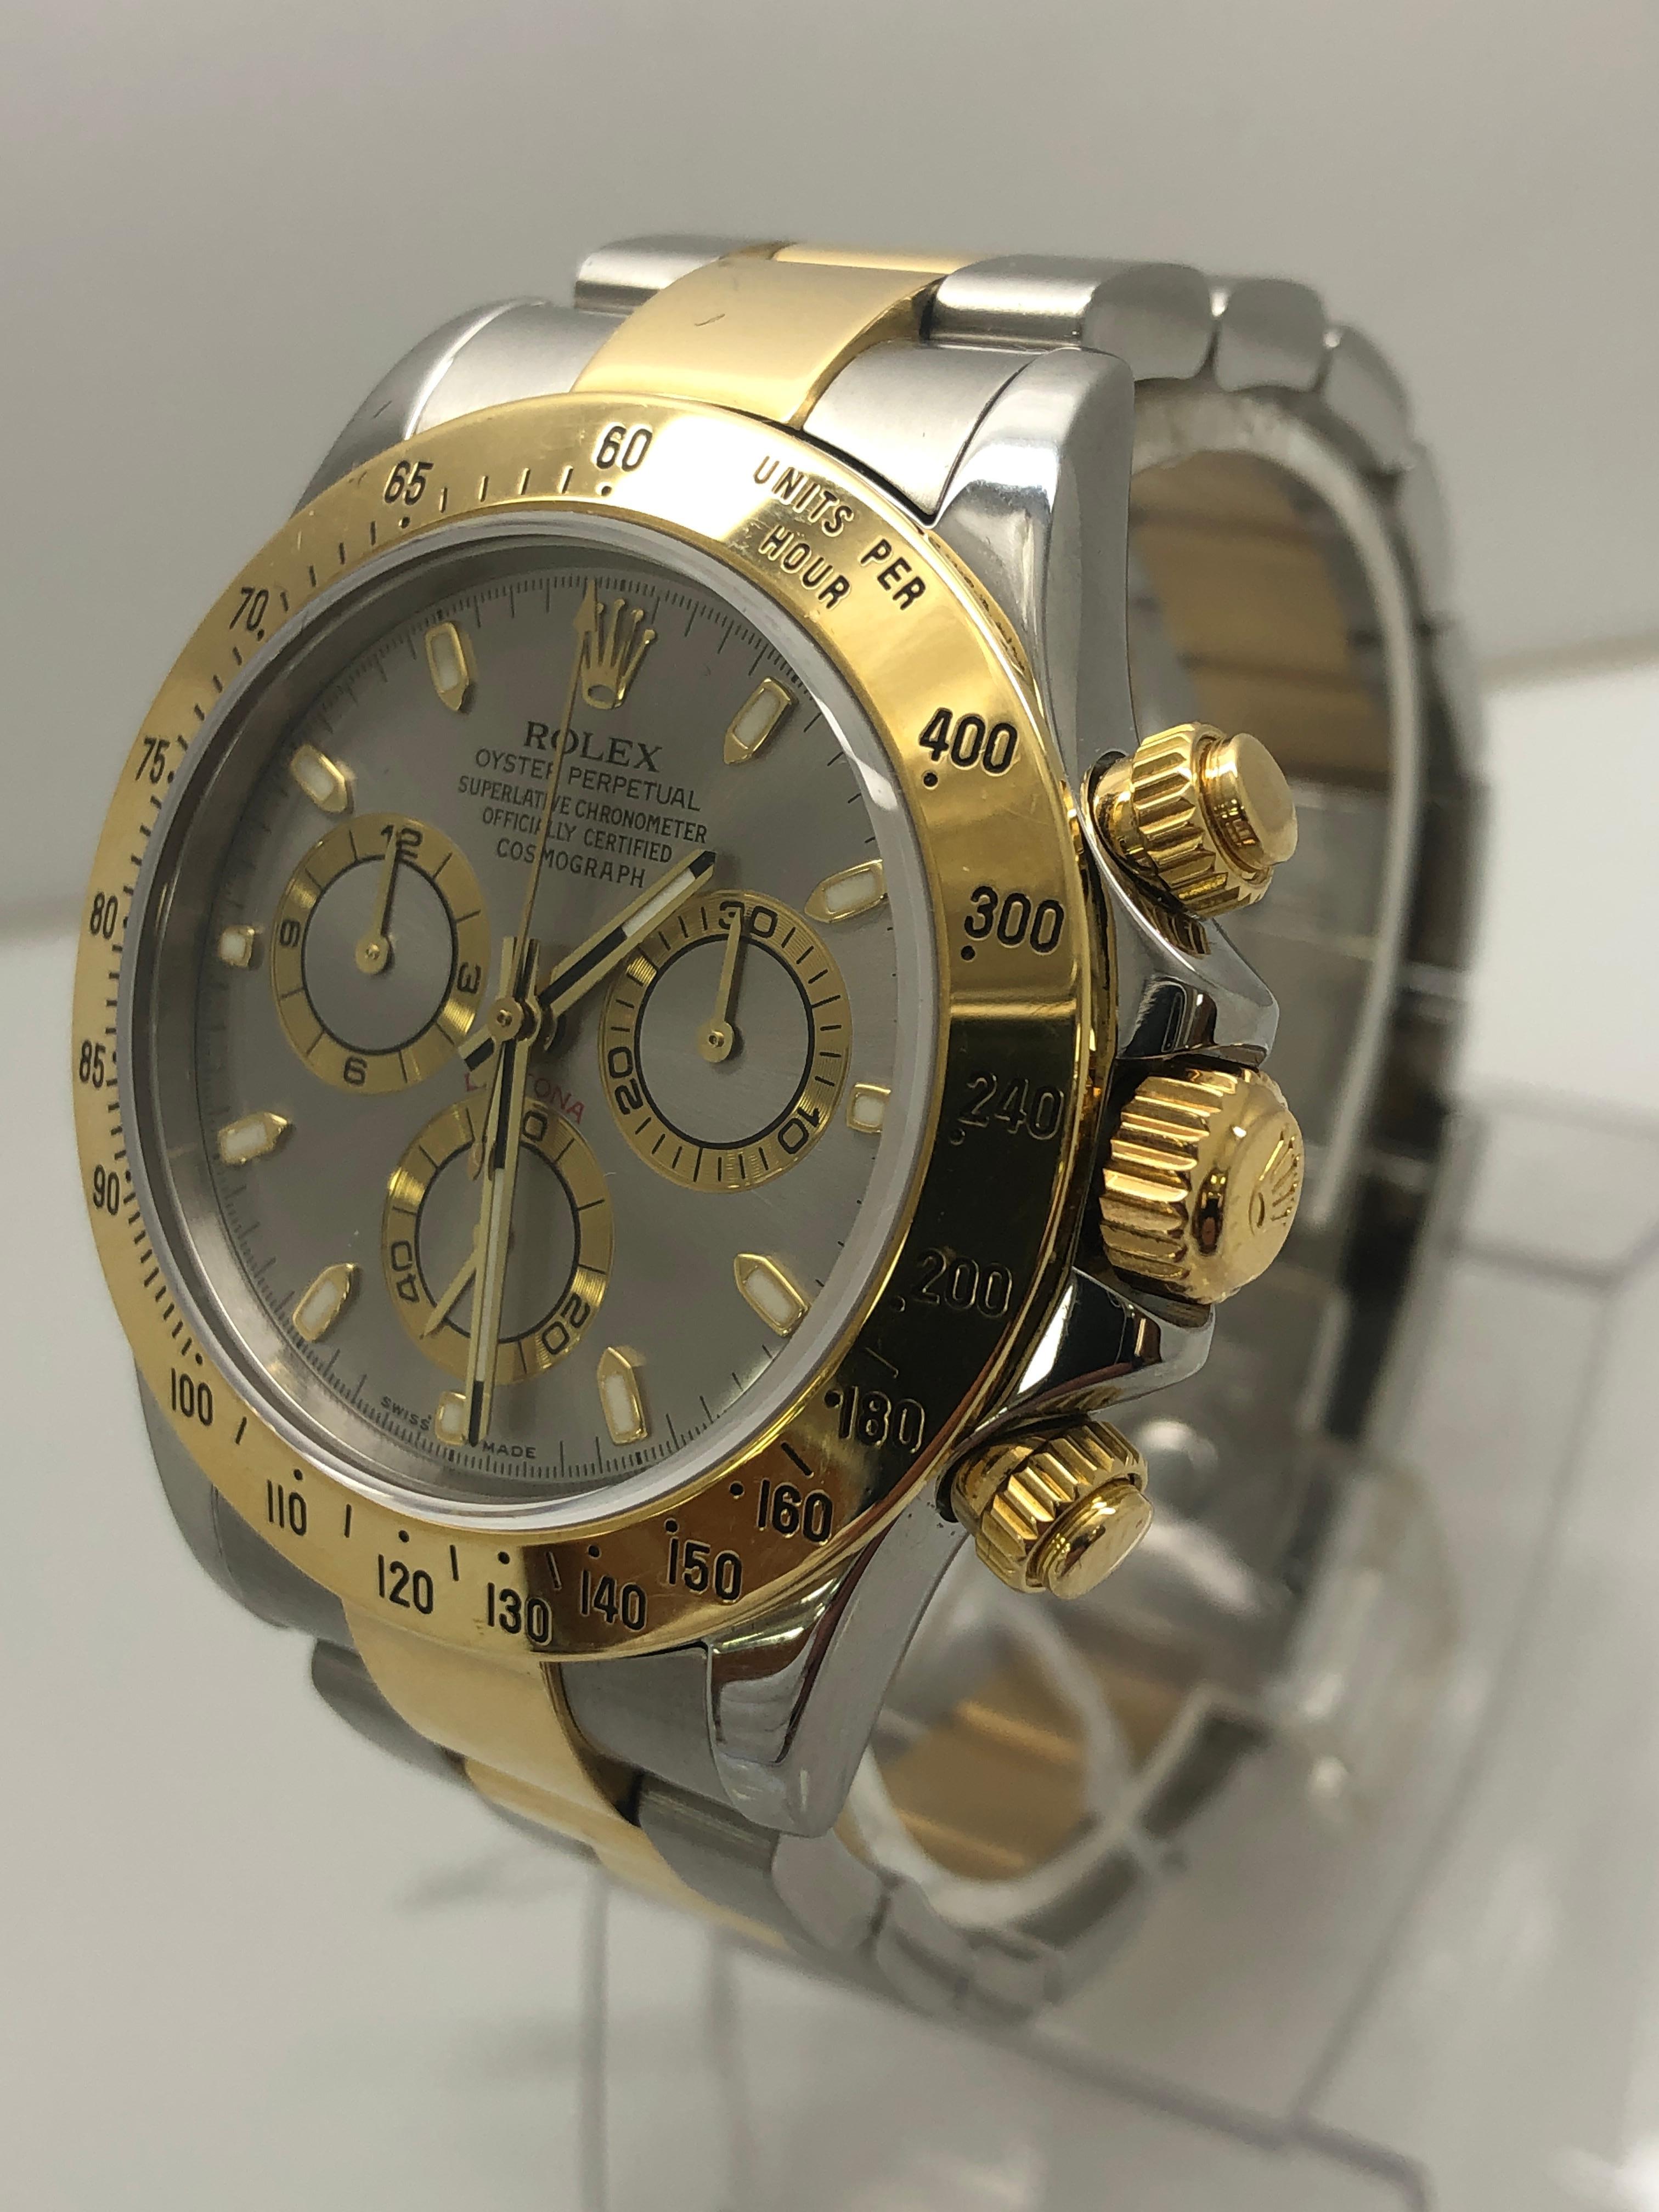 Rolex Daytona Two Tone Silver Diamond Dial Men's Watch

excellent condition

all original parts

free overnight shipping

shop with confidence

2 year warranty